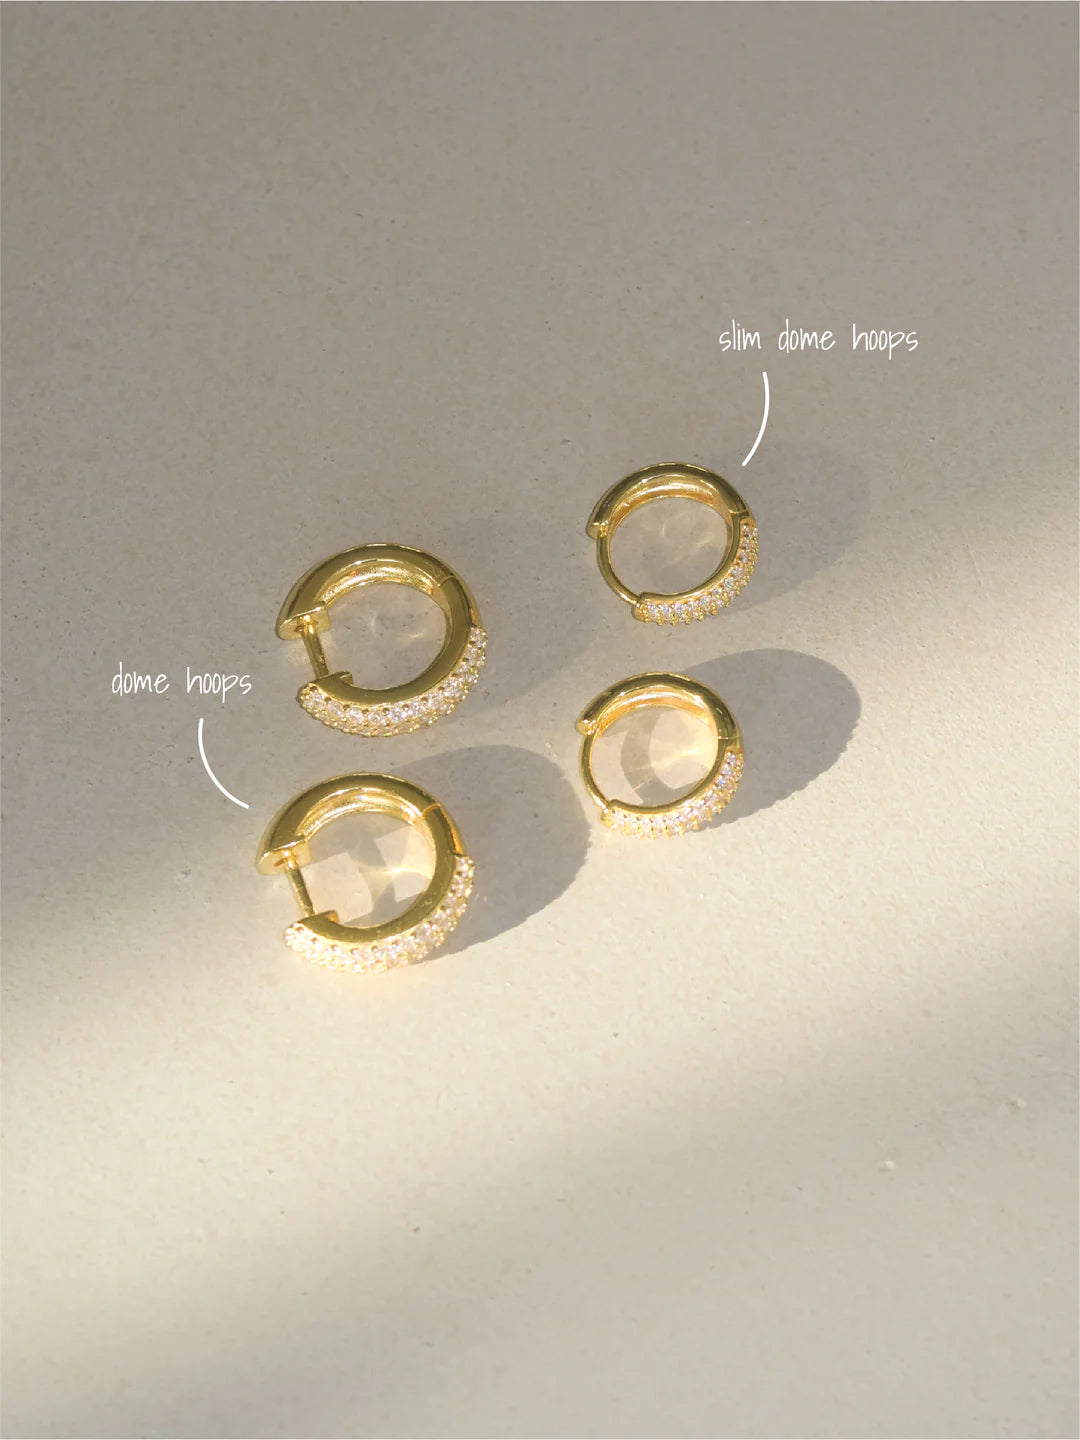 Slim Dome Hoops Gold